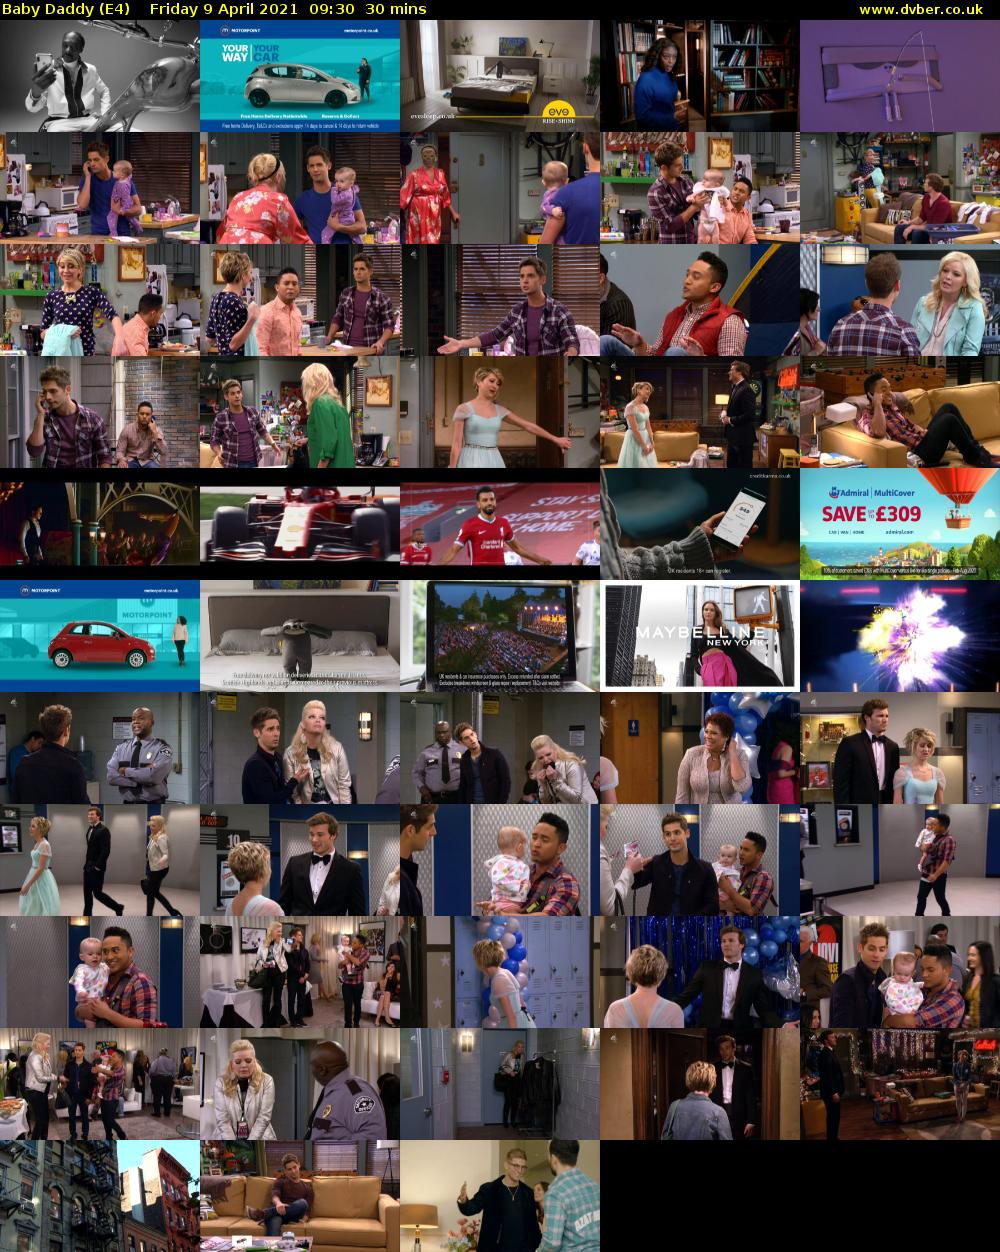 Baby Daddy (E4) Friday 9 April 2021 09:30 - 10:00